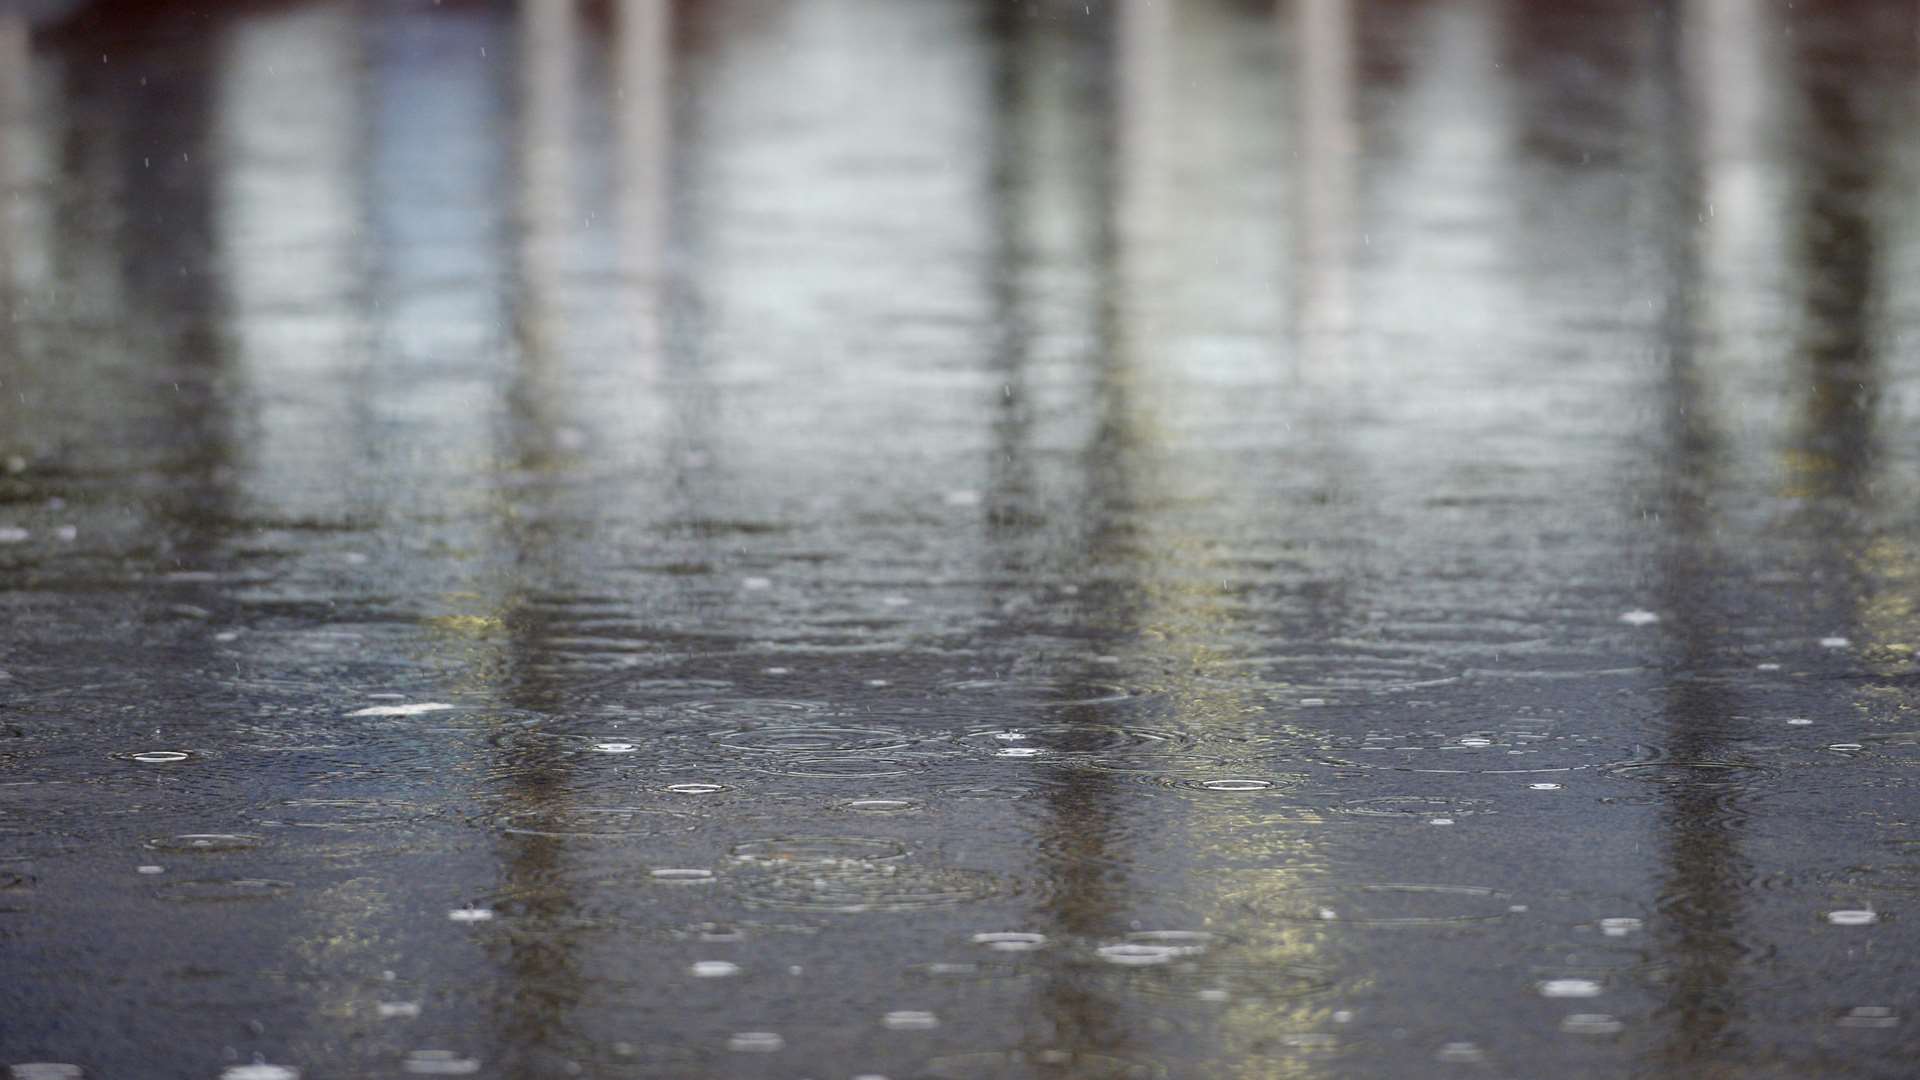 The Met Office is warning of heavy downpours today